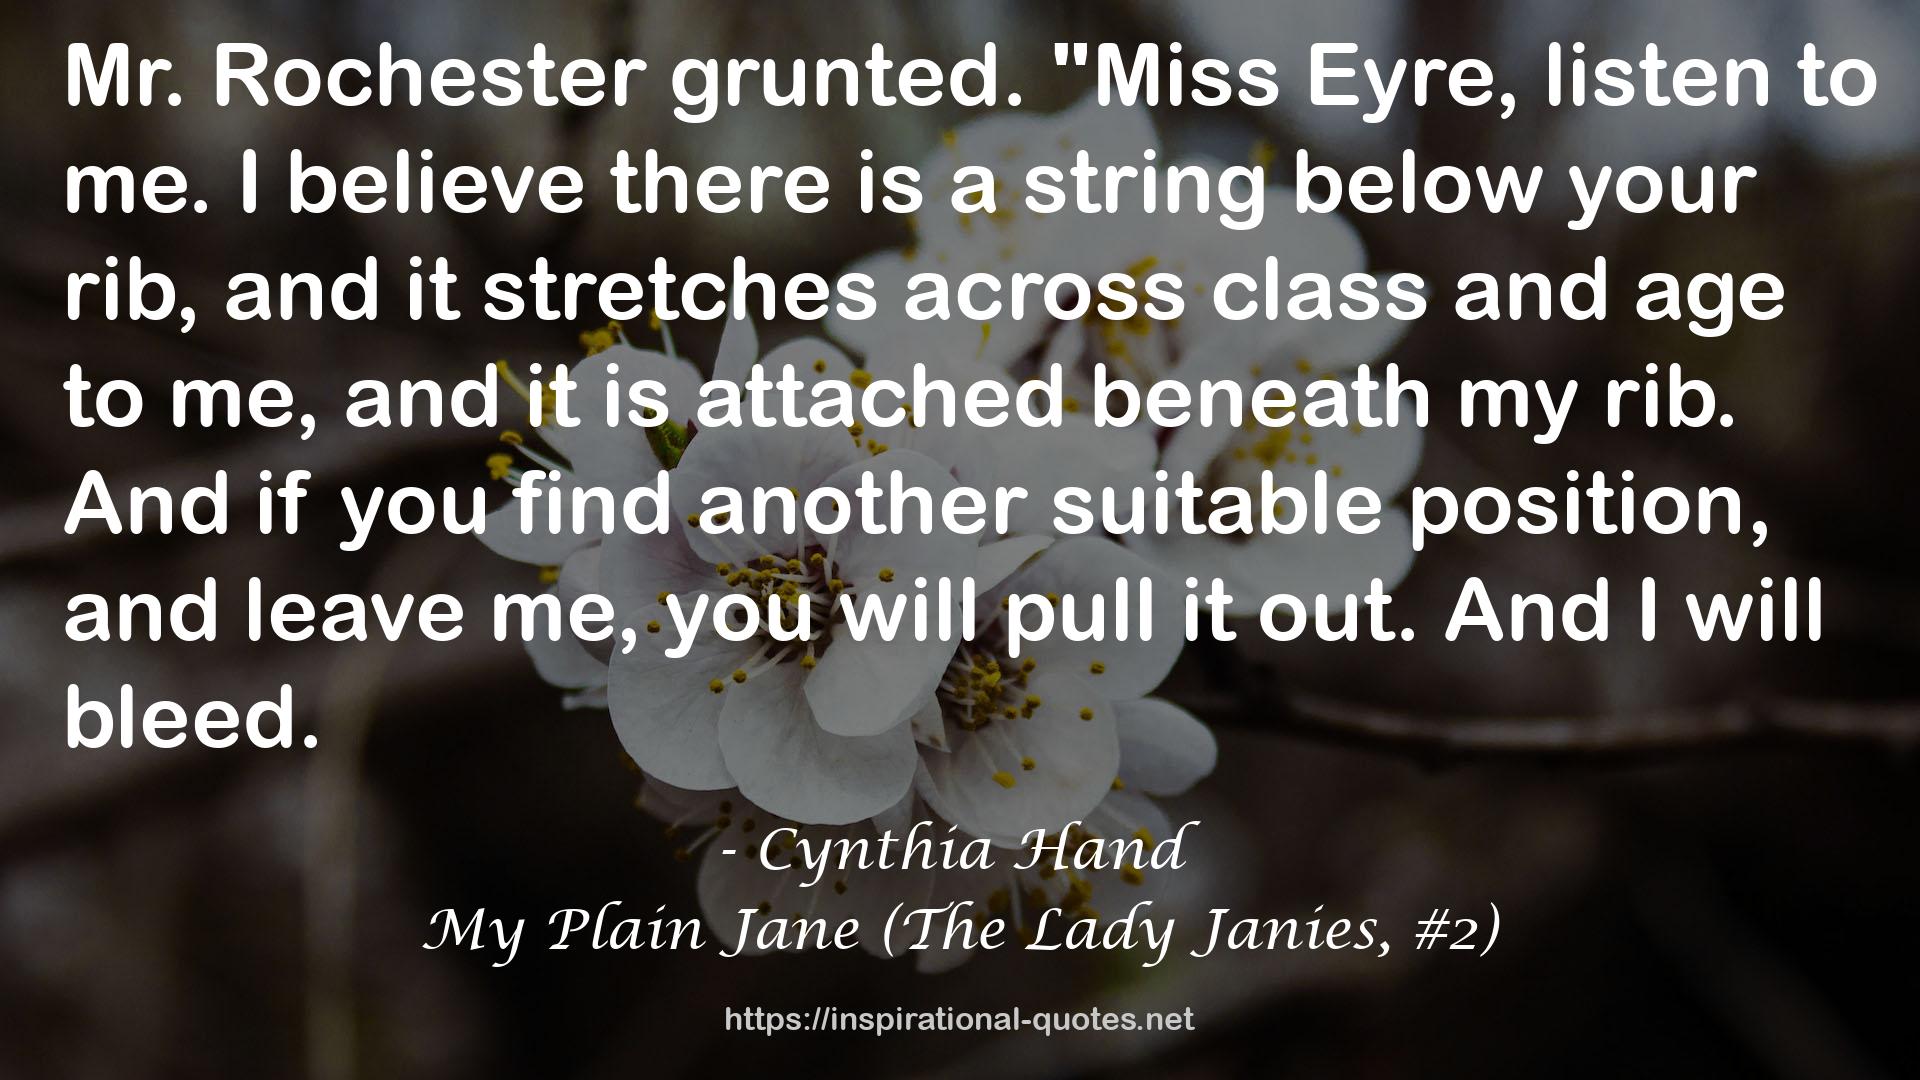 My Plain Jane (The Lady Janies, #2) QUOTES